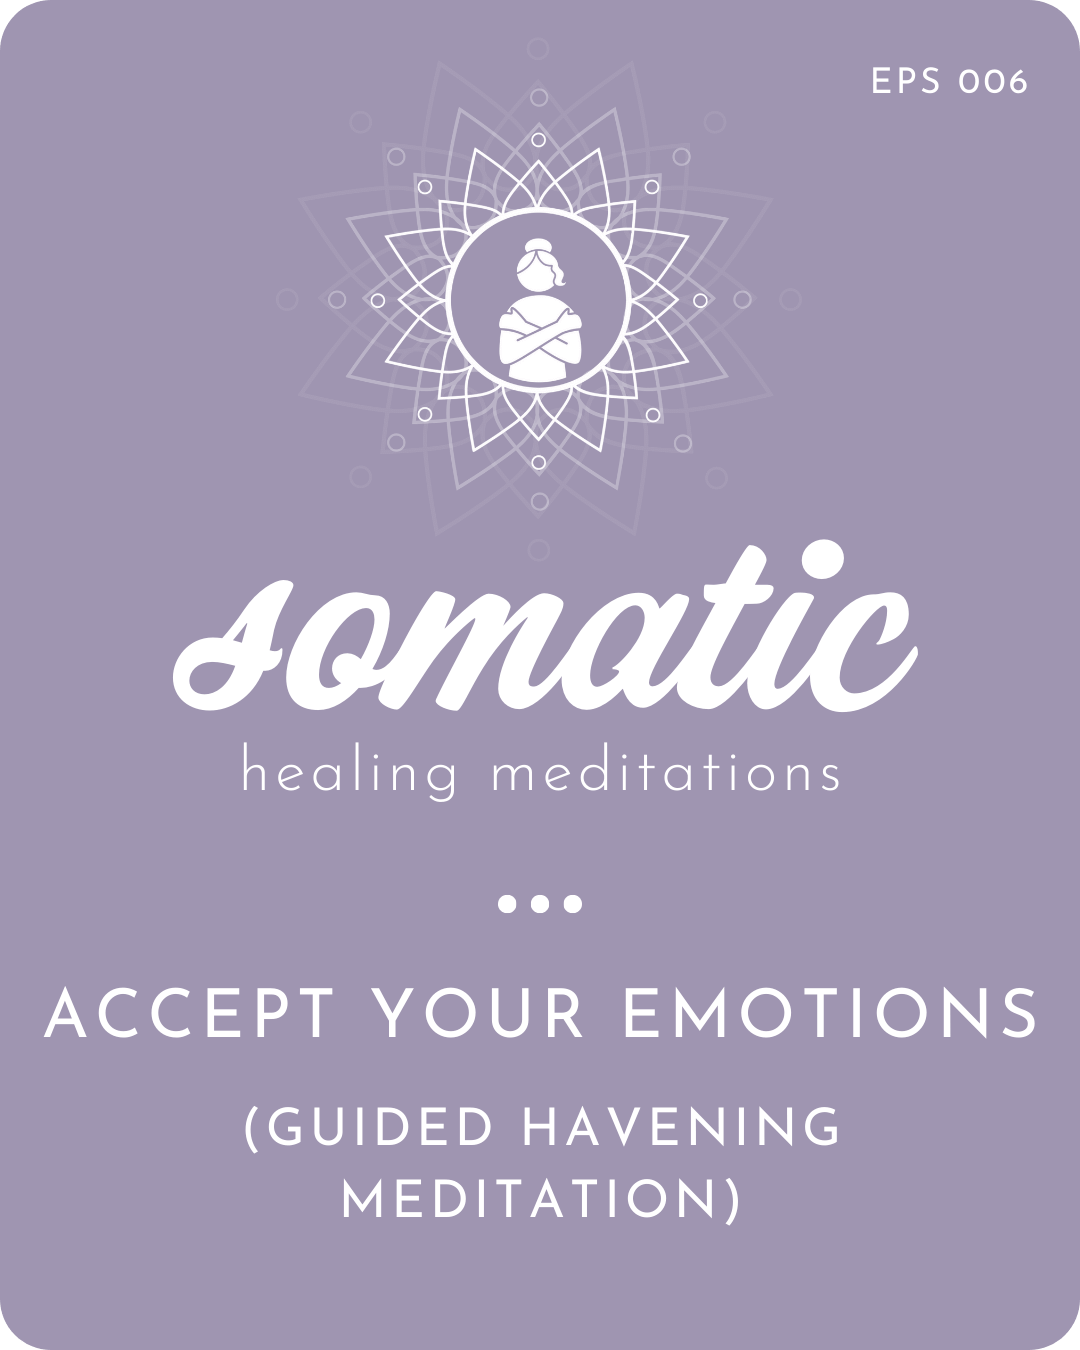 Accept Your Emotions (Guided Meditation with Havening Techniques)